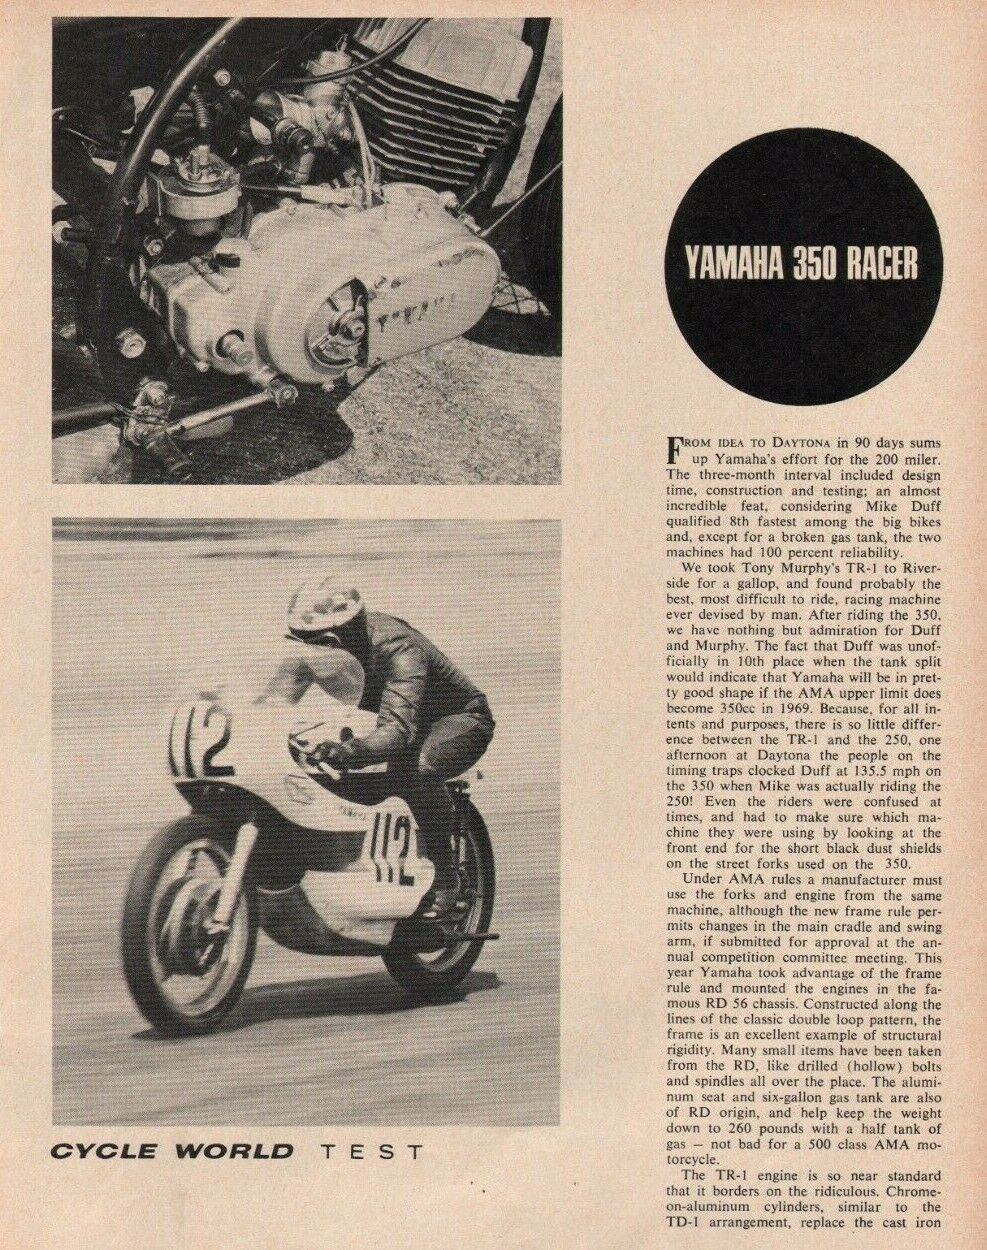 1967 Yamaha 350 Racer - 3-Page Vintage Motorcycle Article